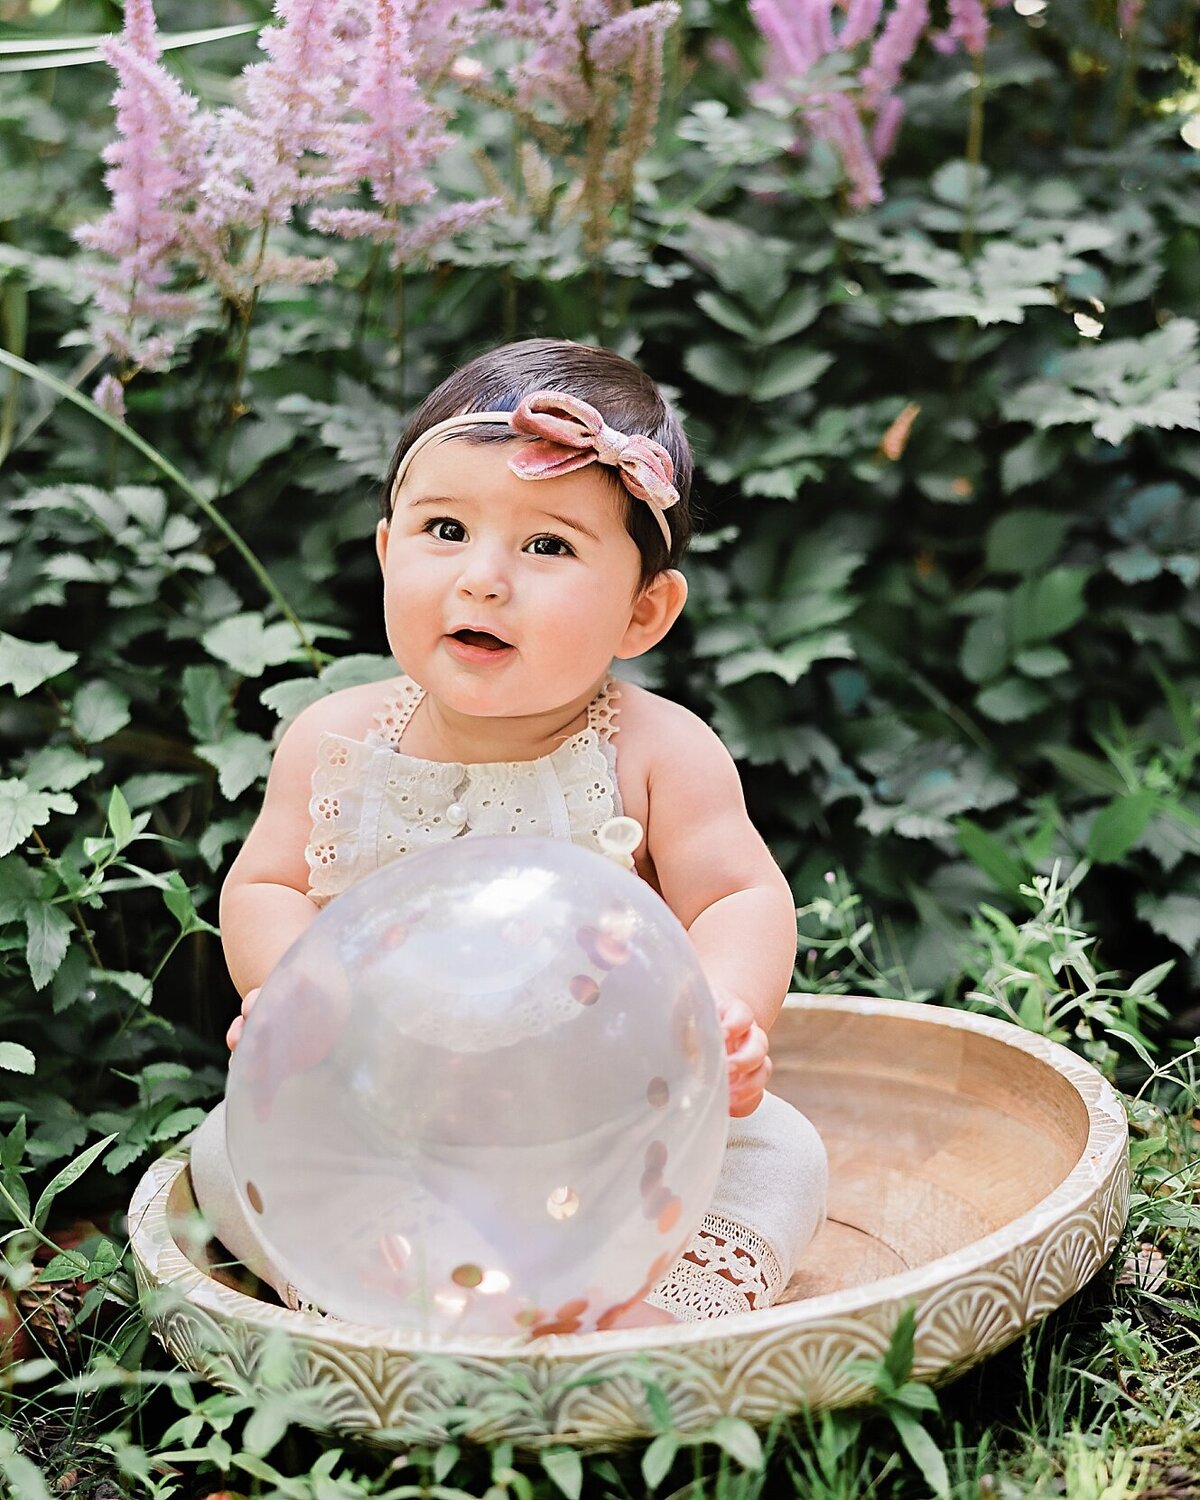 baby girl sitting in bowl with balloon in Portland garden